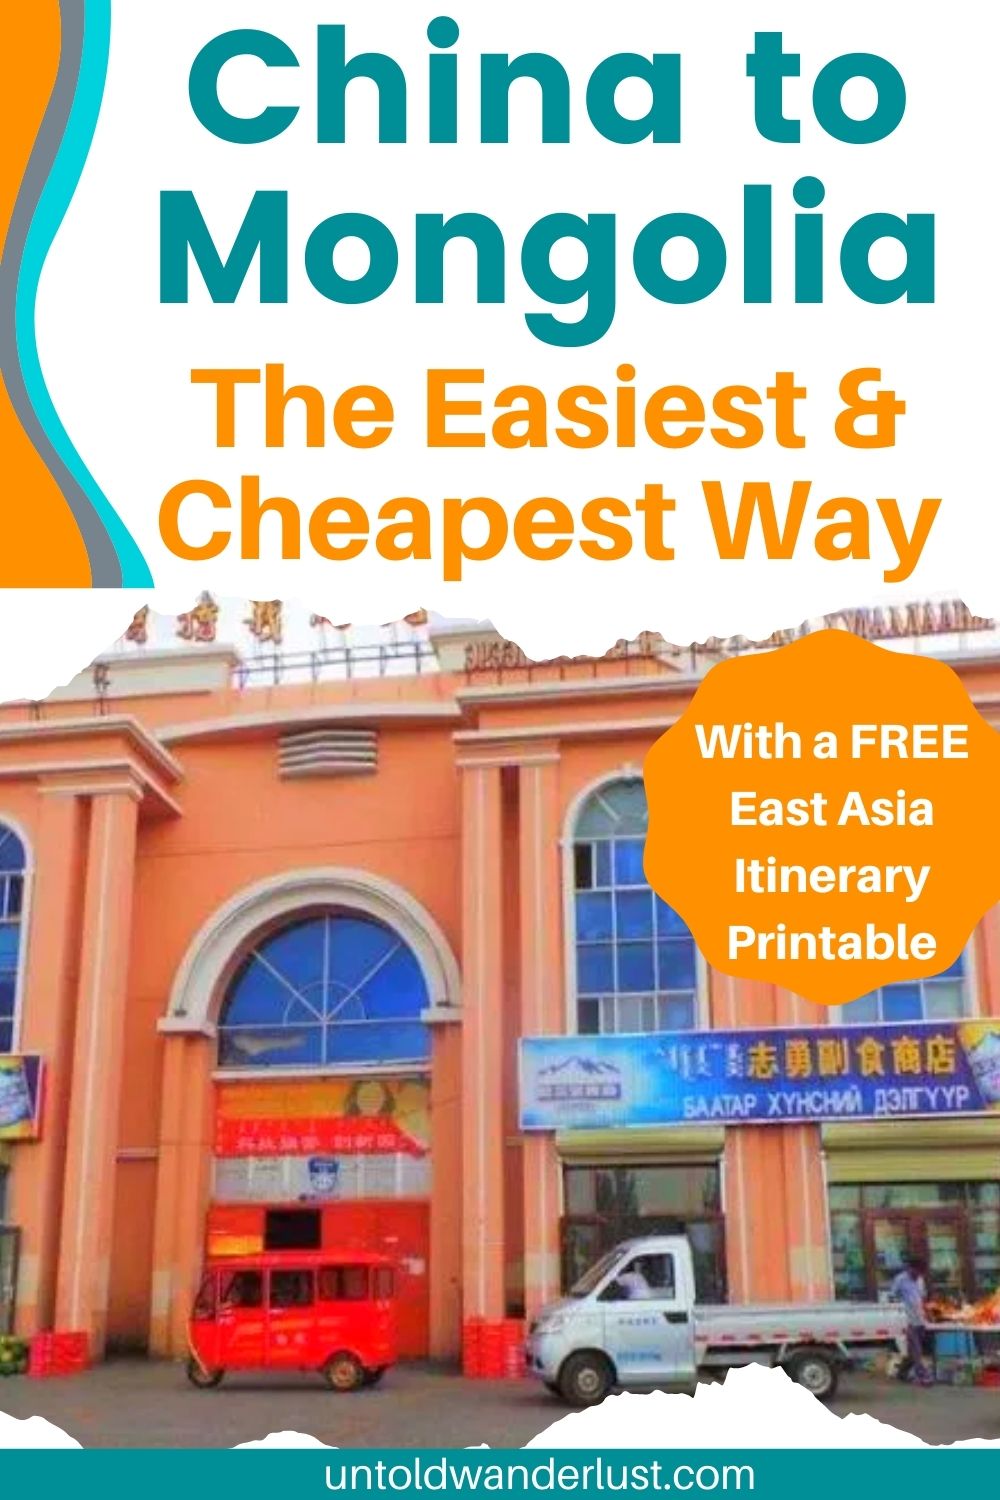 China to Mongolia Overland | The Easiest & Cheapest Way